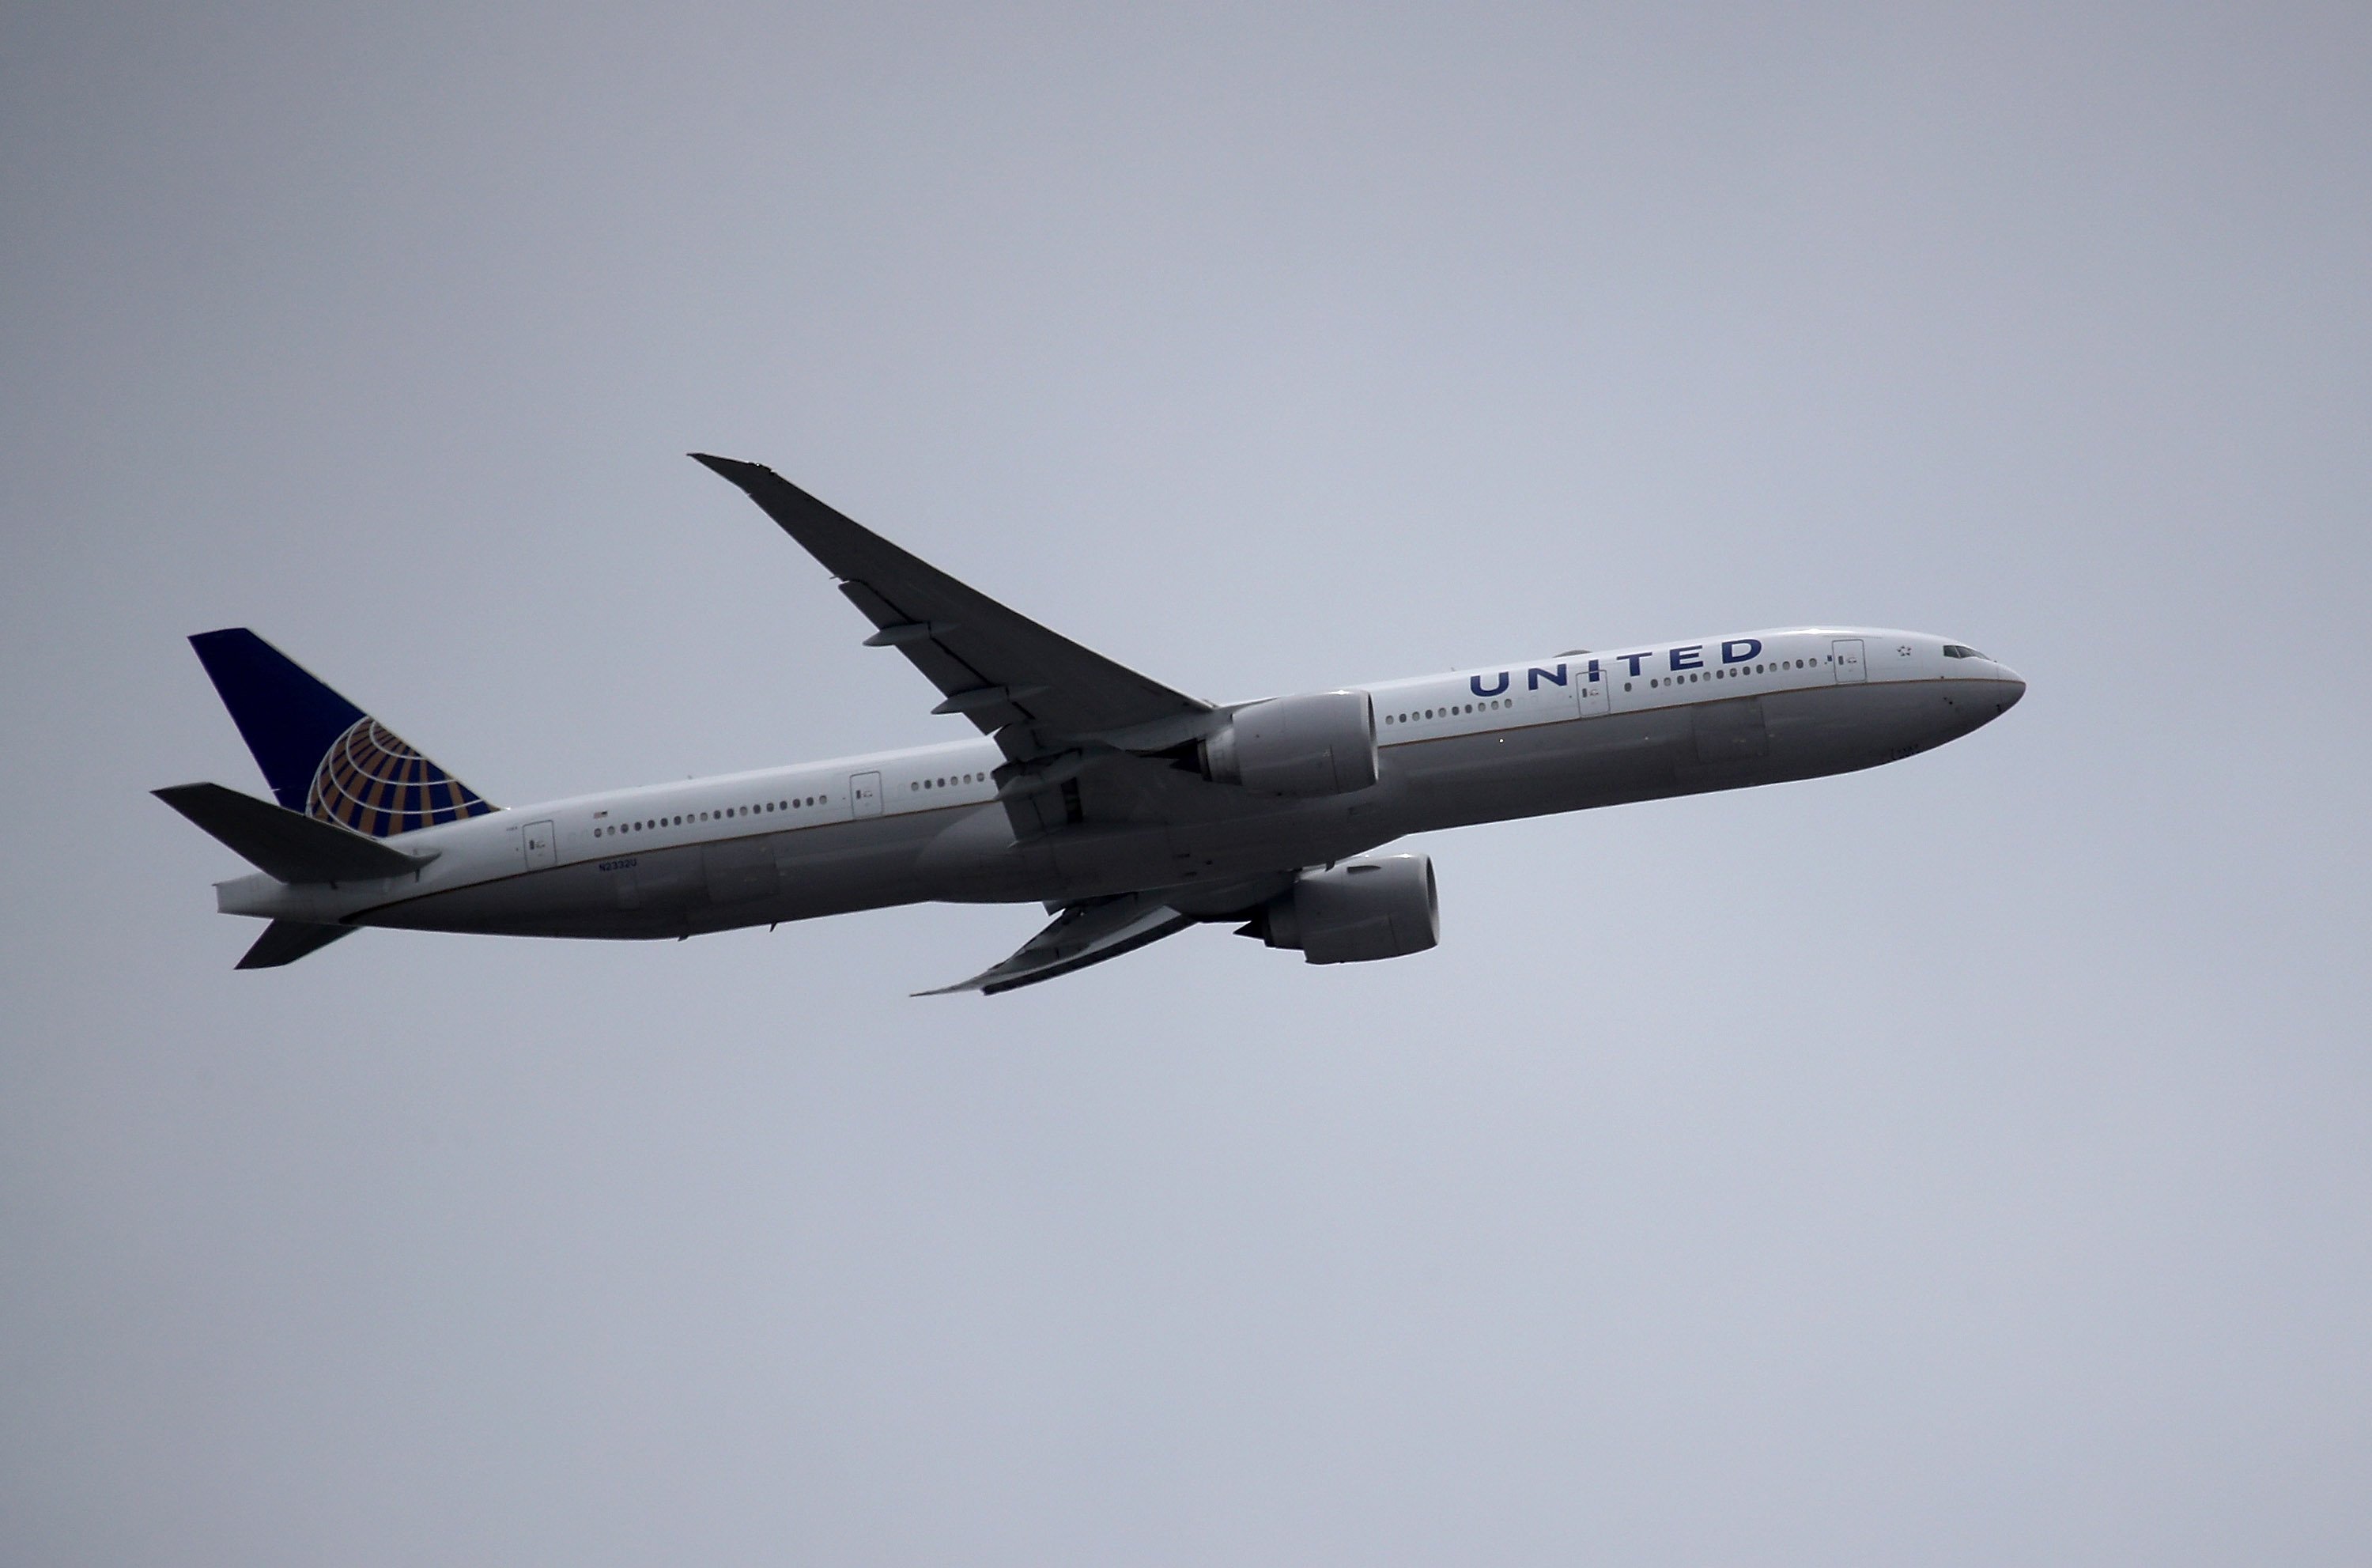 A United Airlines plane taking off from San Francisco International Airport | Photo: Getty Images